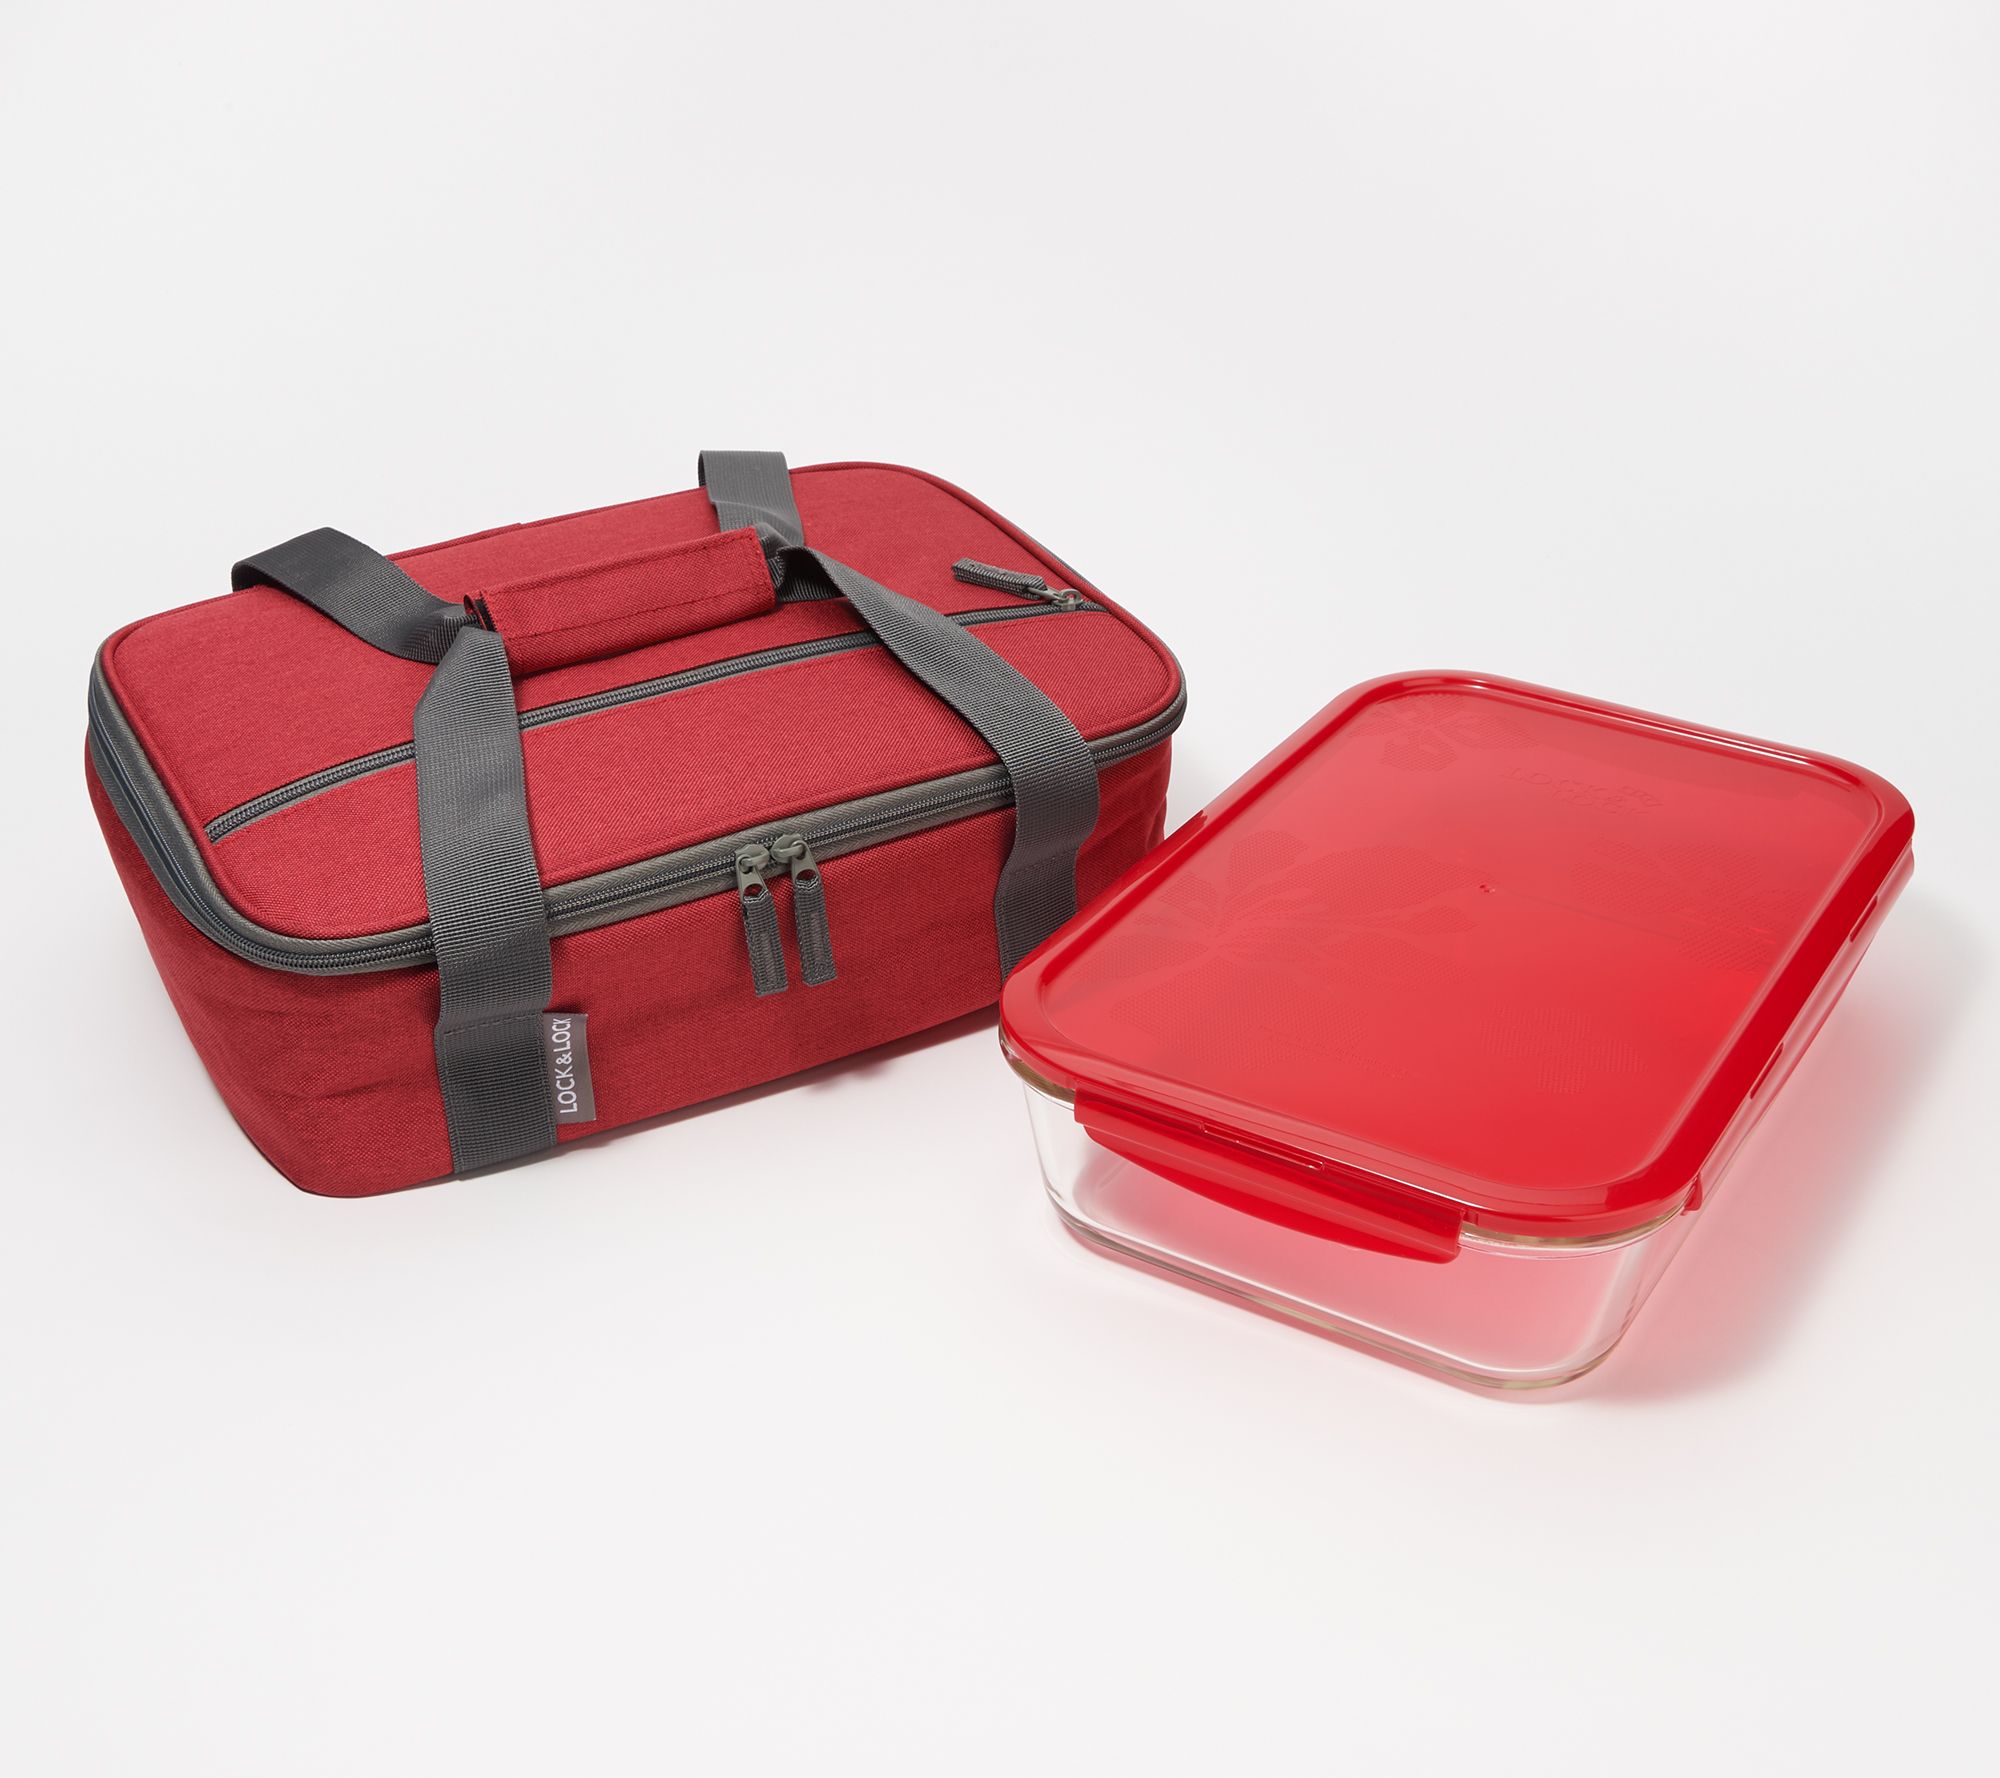 Cake and Casserole Insulated Carrier for 9x13 Pan